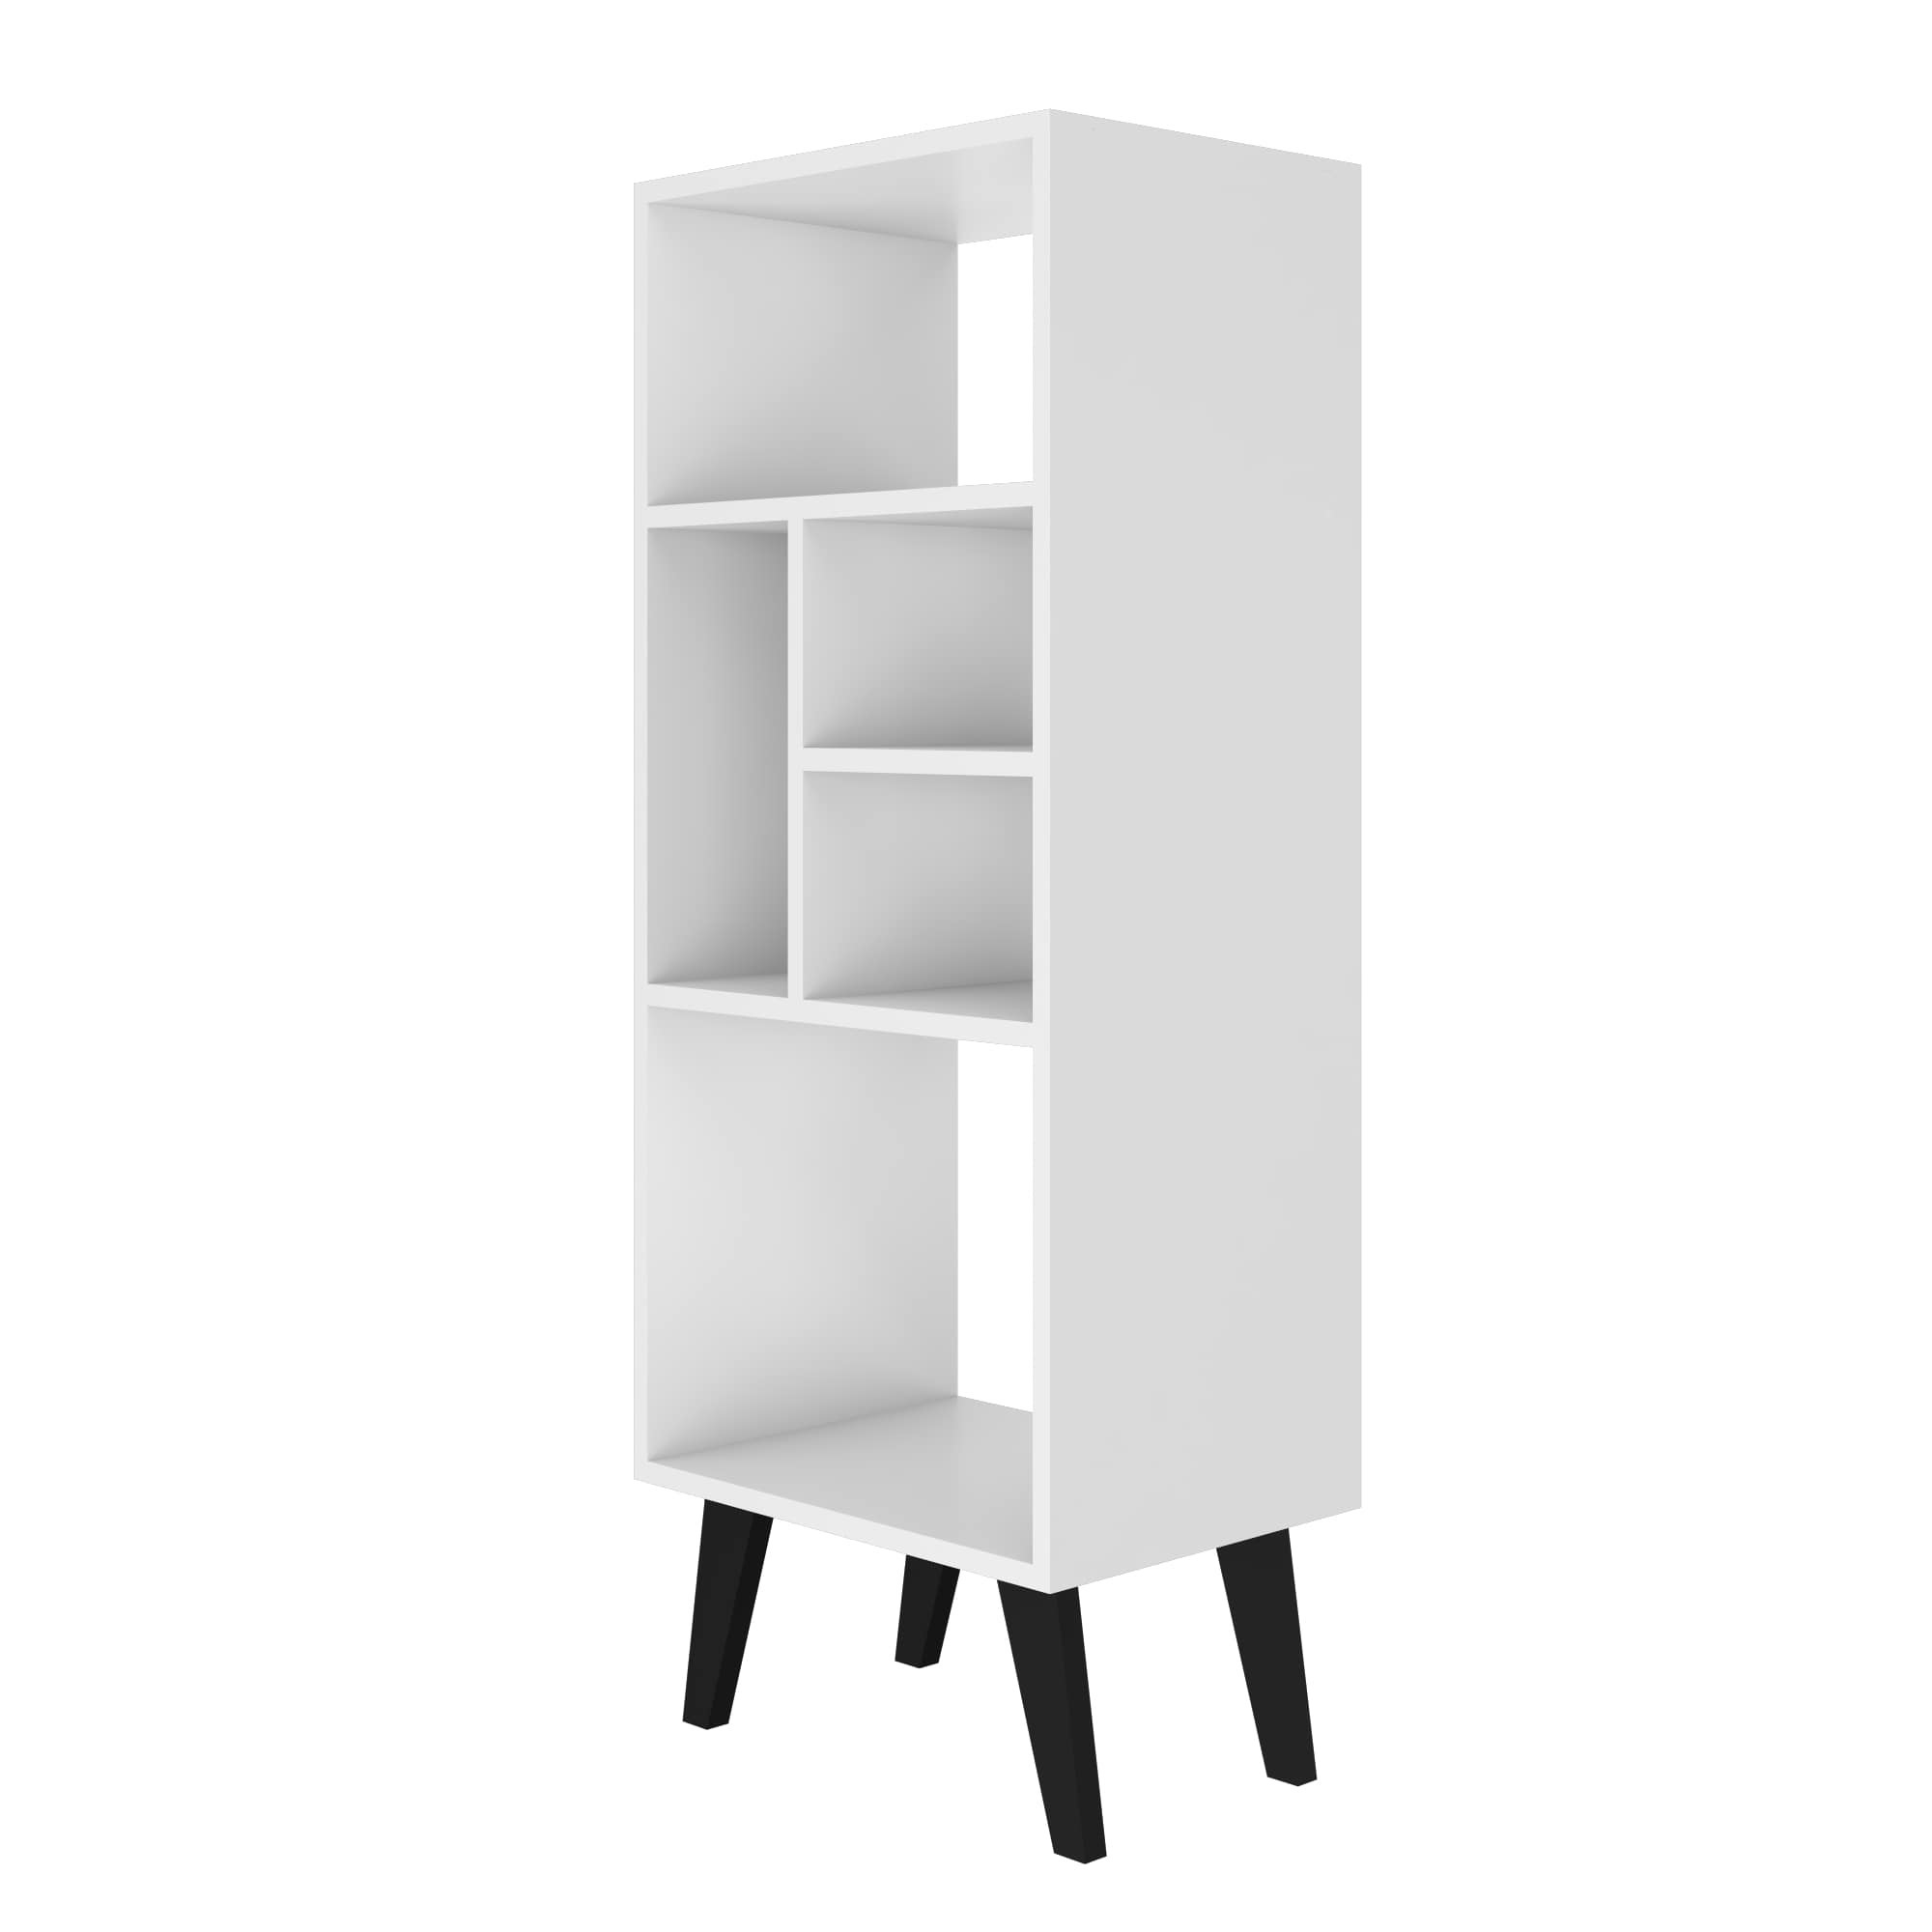 Manhattan Comfort, Warren Mid-High Bookcase 2.0Inch White, Height 42.32 in, Shelves (qty.) 5 Material MDPE, Model 179AMC